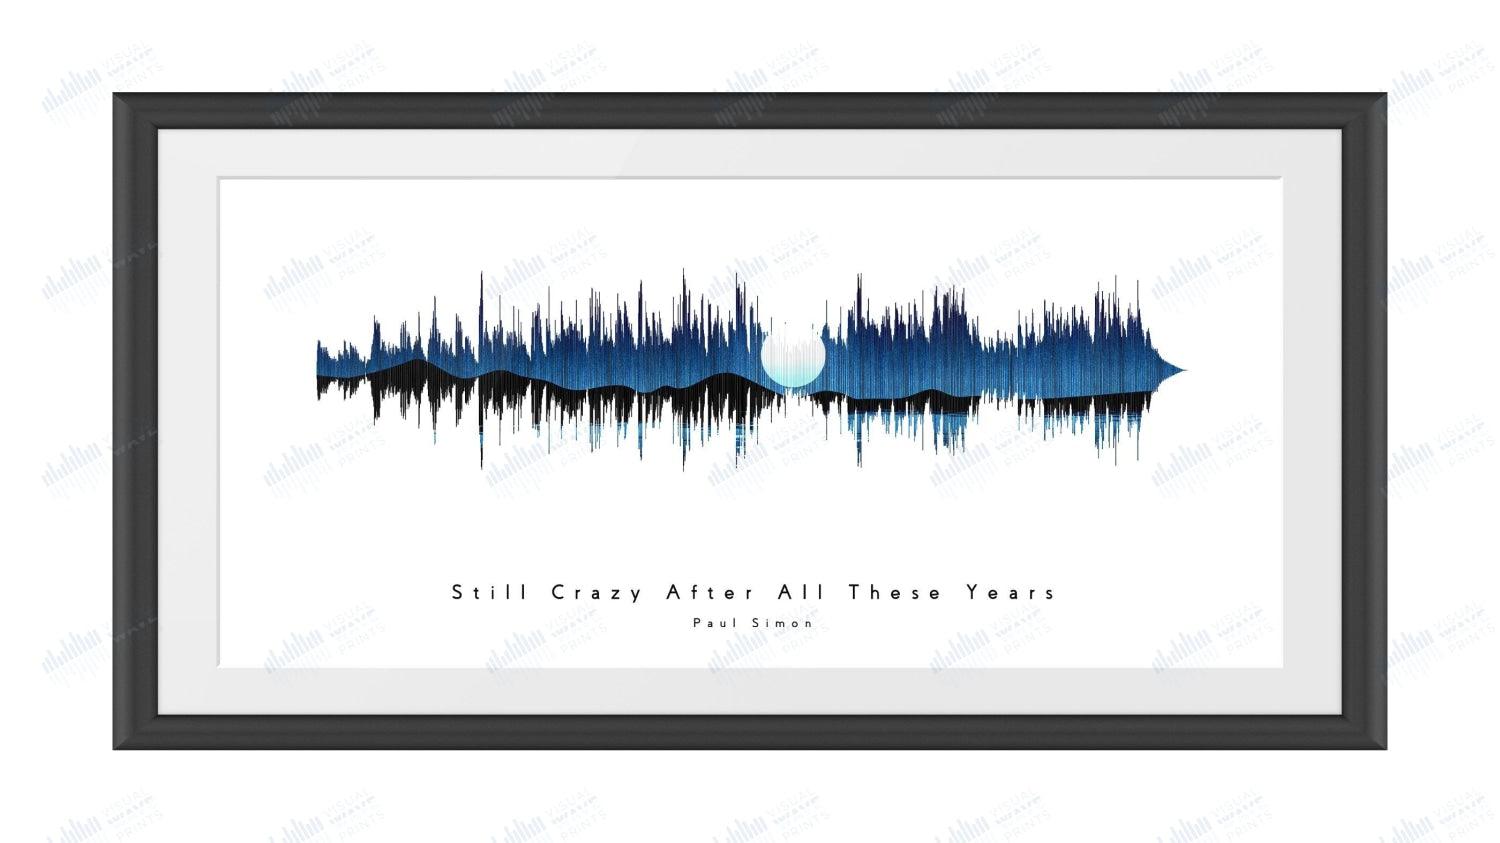 Still Crazy After All These Years by Paul Simon - Visual Wave Prints